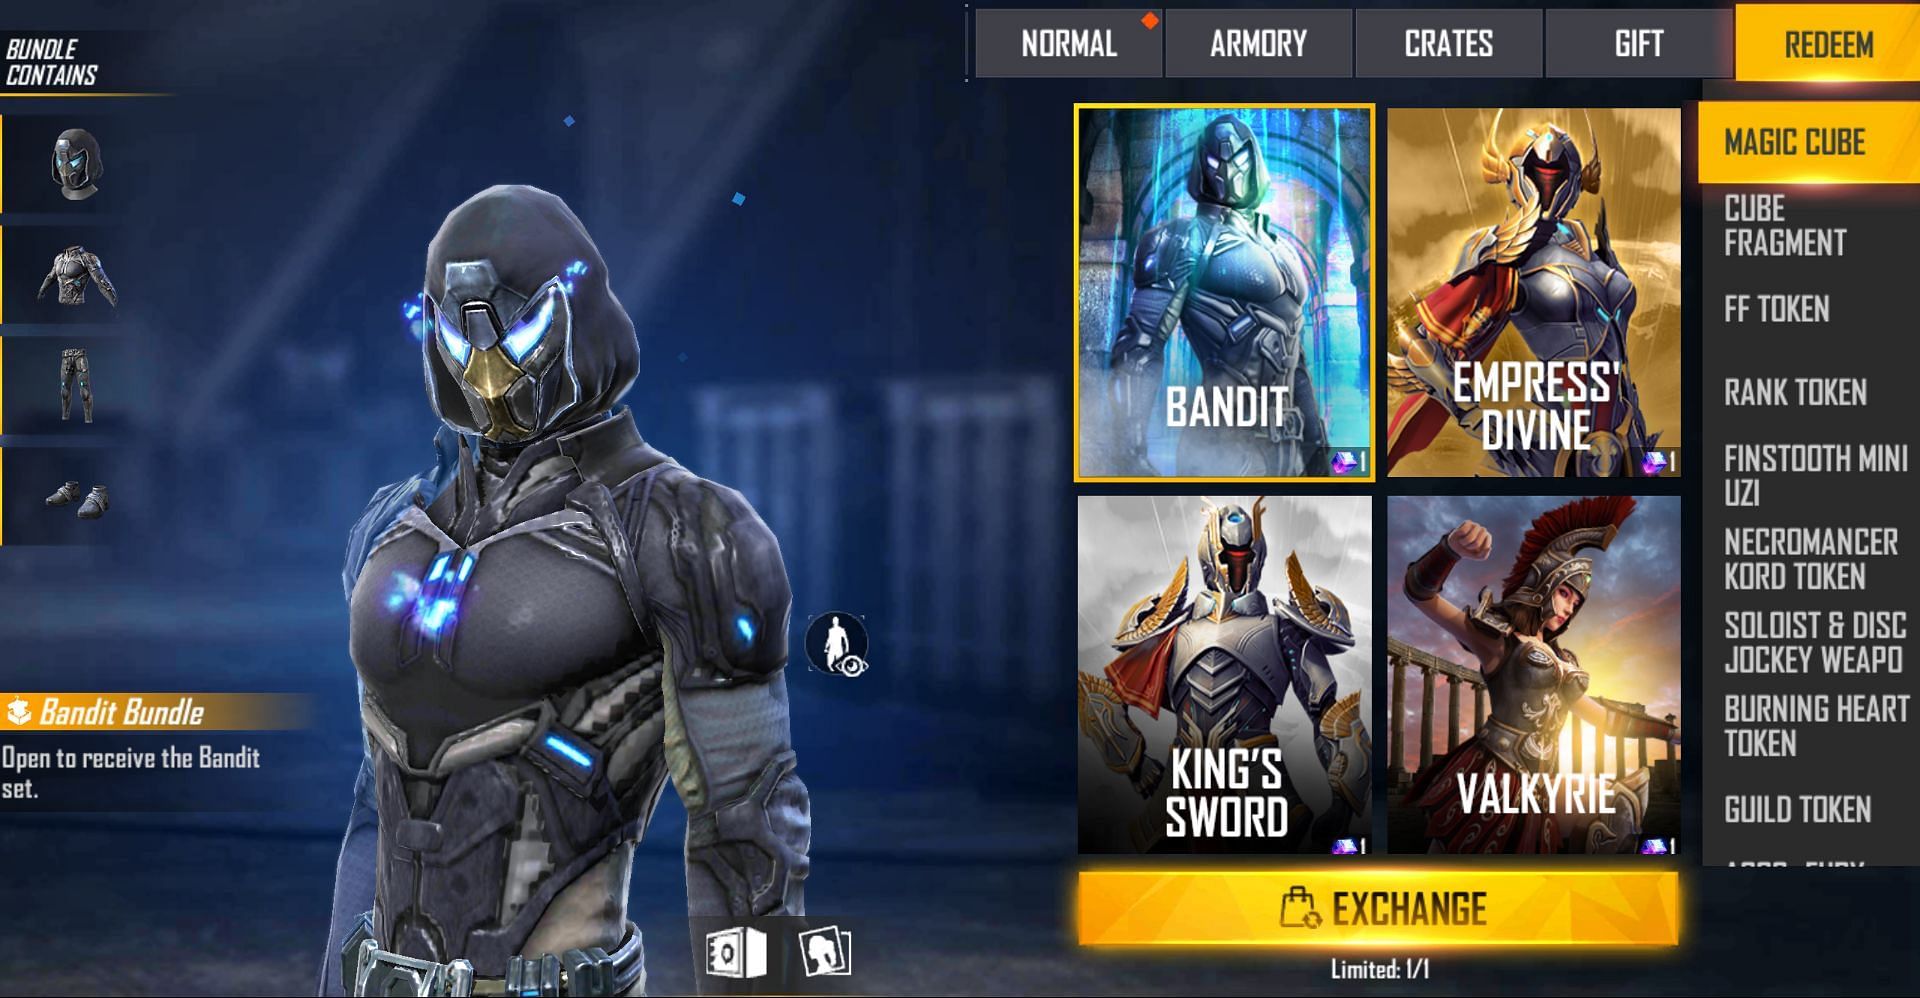 Users can then exchange the Magic Cube to get the Bandit Bundle in the game (Image via Free Fire)